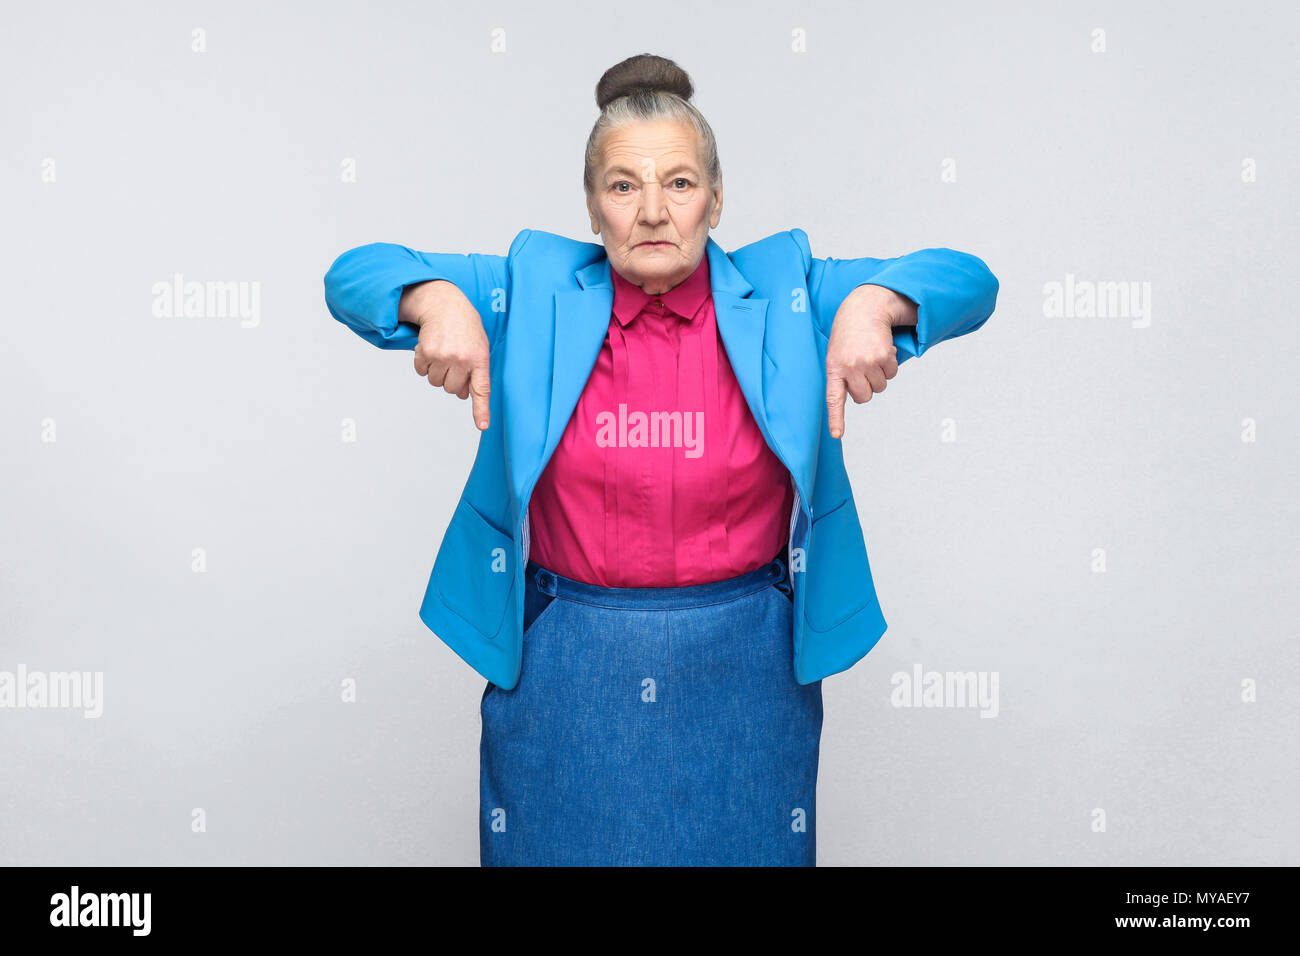 serious aged woman pointing fingers at copy space. Portrait of expressive grandmother with light blue suit and pink shirt standing with collected bun  Stock Photo